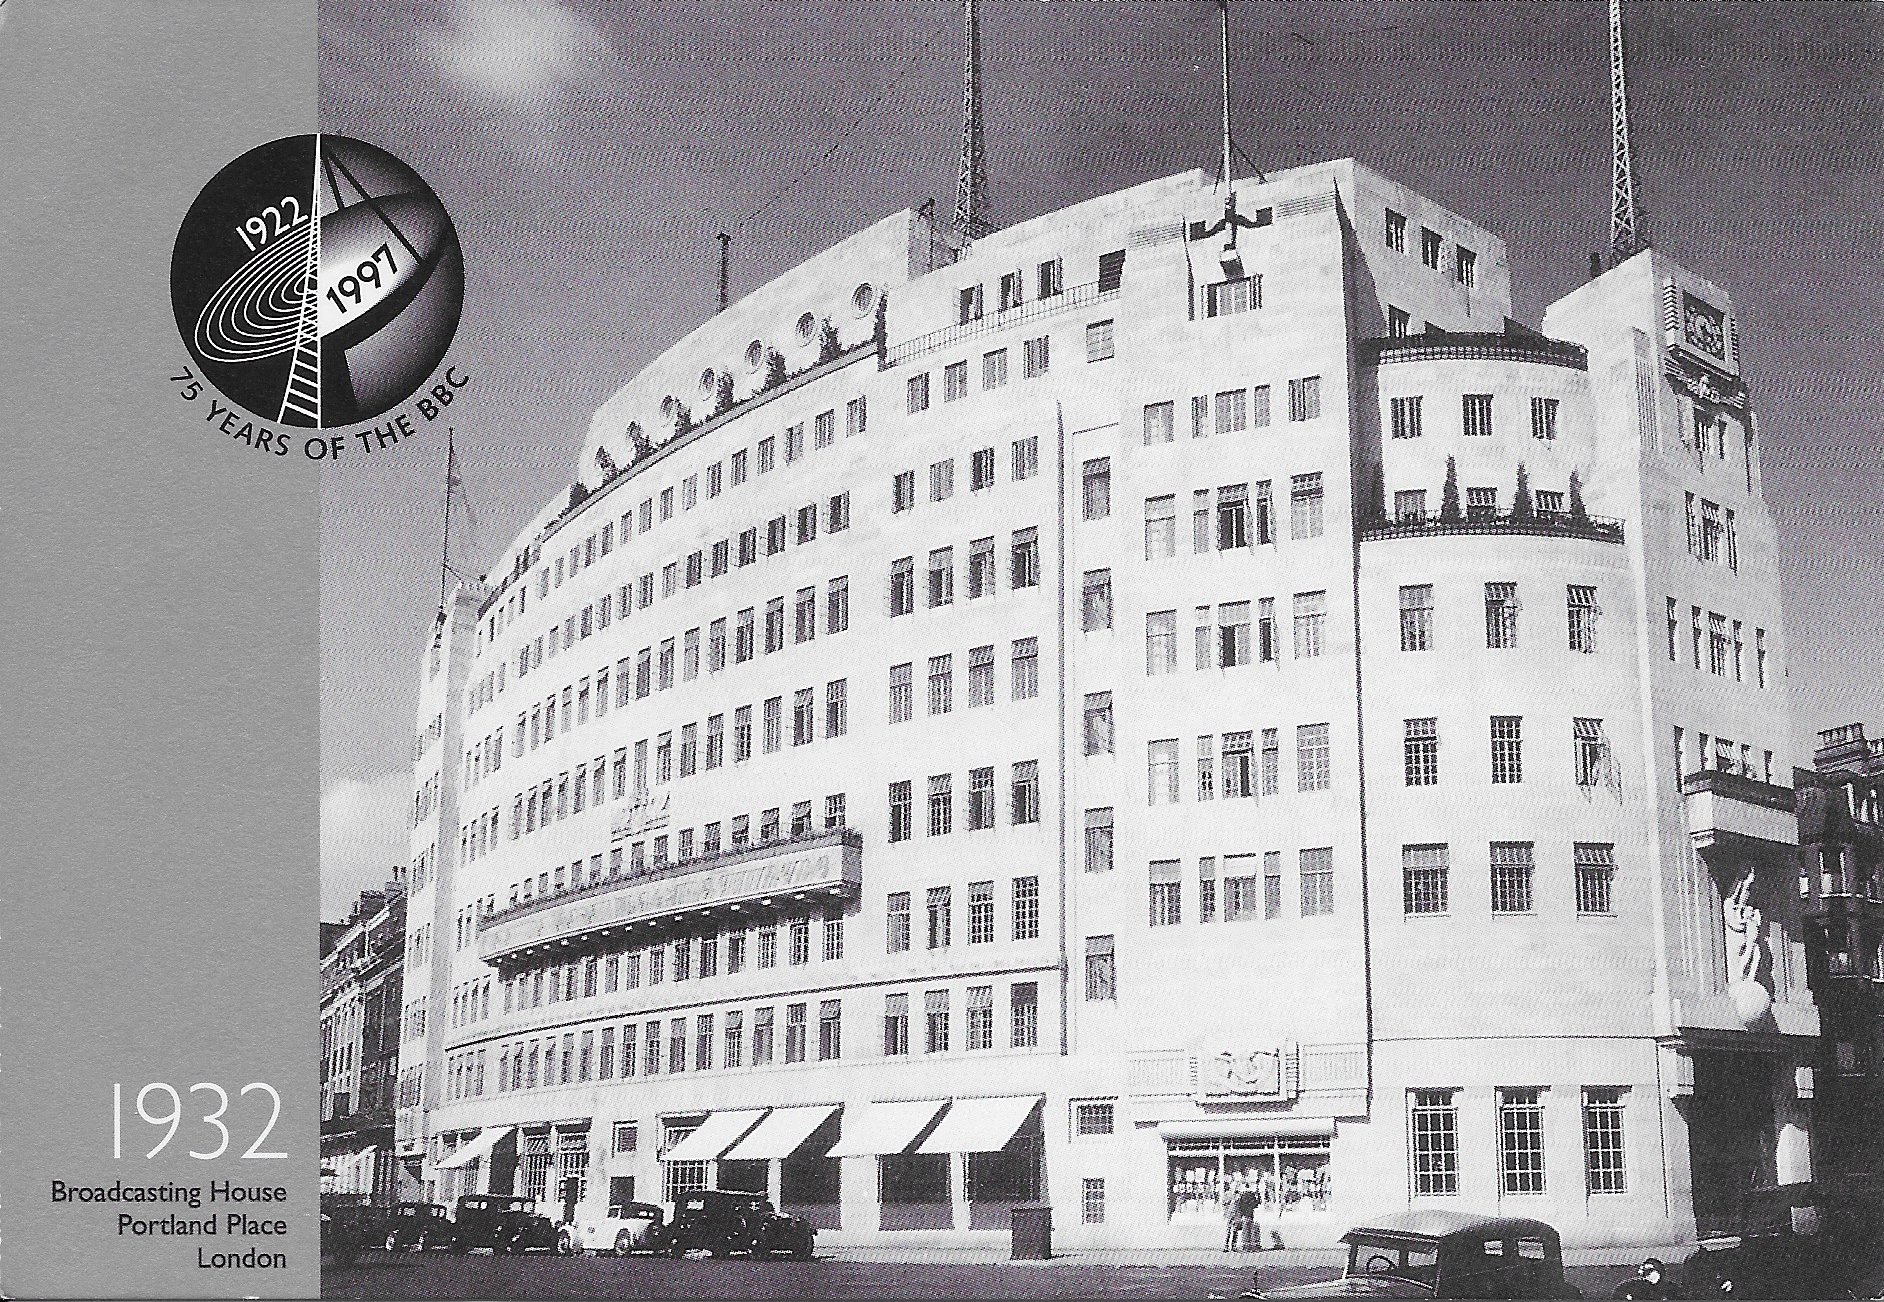 Picture of 75 years of the BBC - Broadcasting House by artist Unknown from the BBC postcards - Records and Tapes library